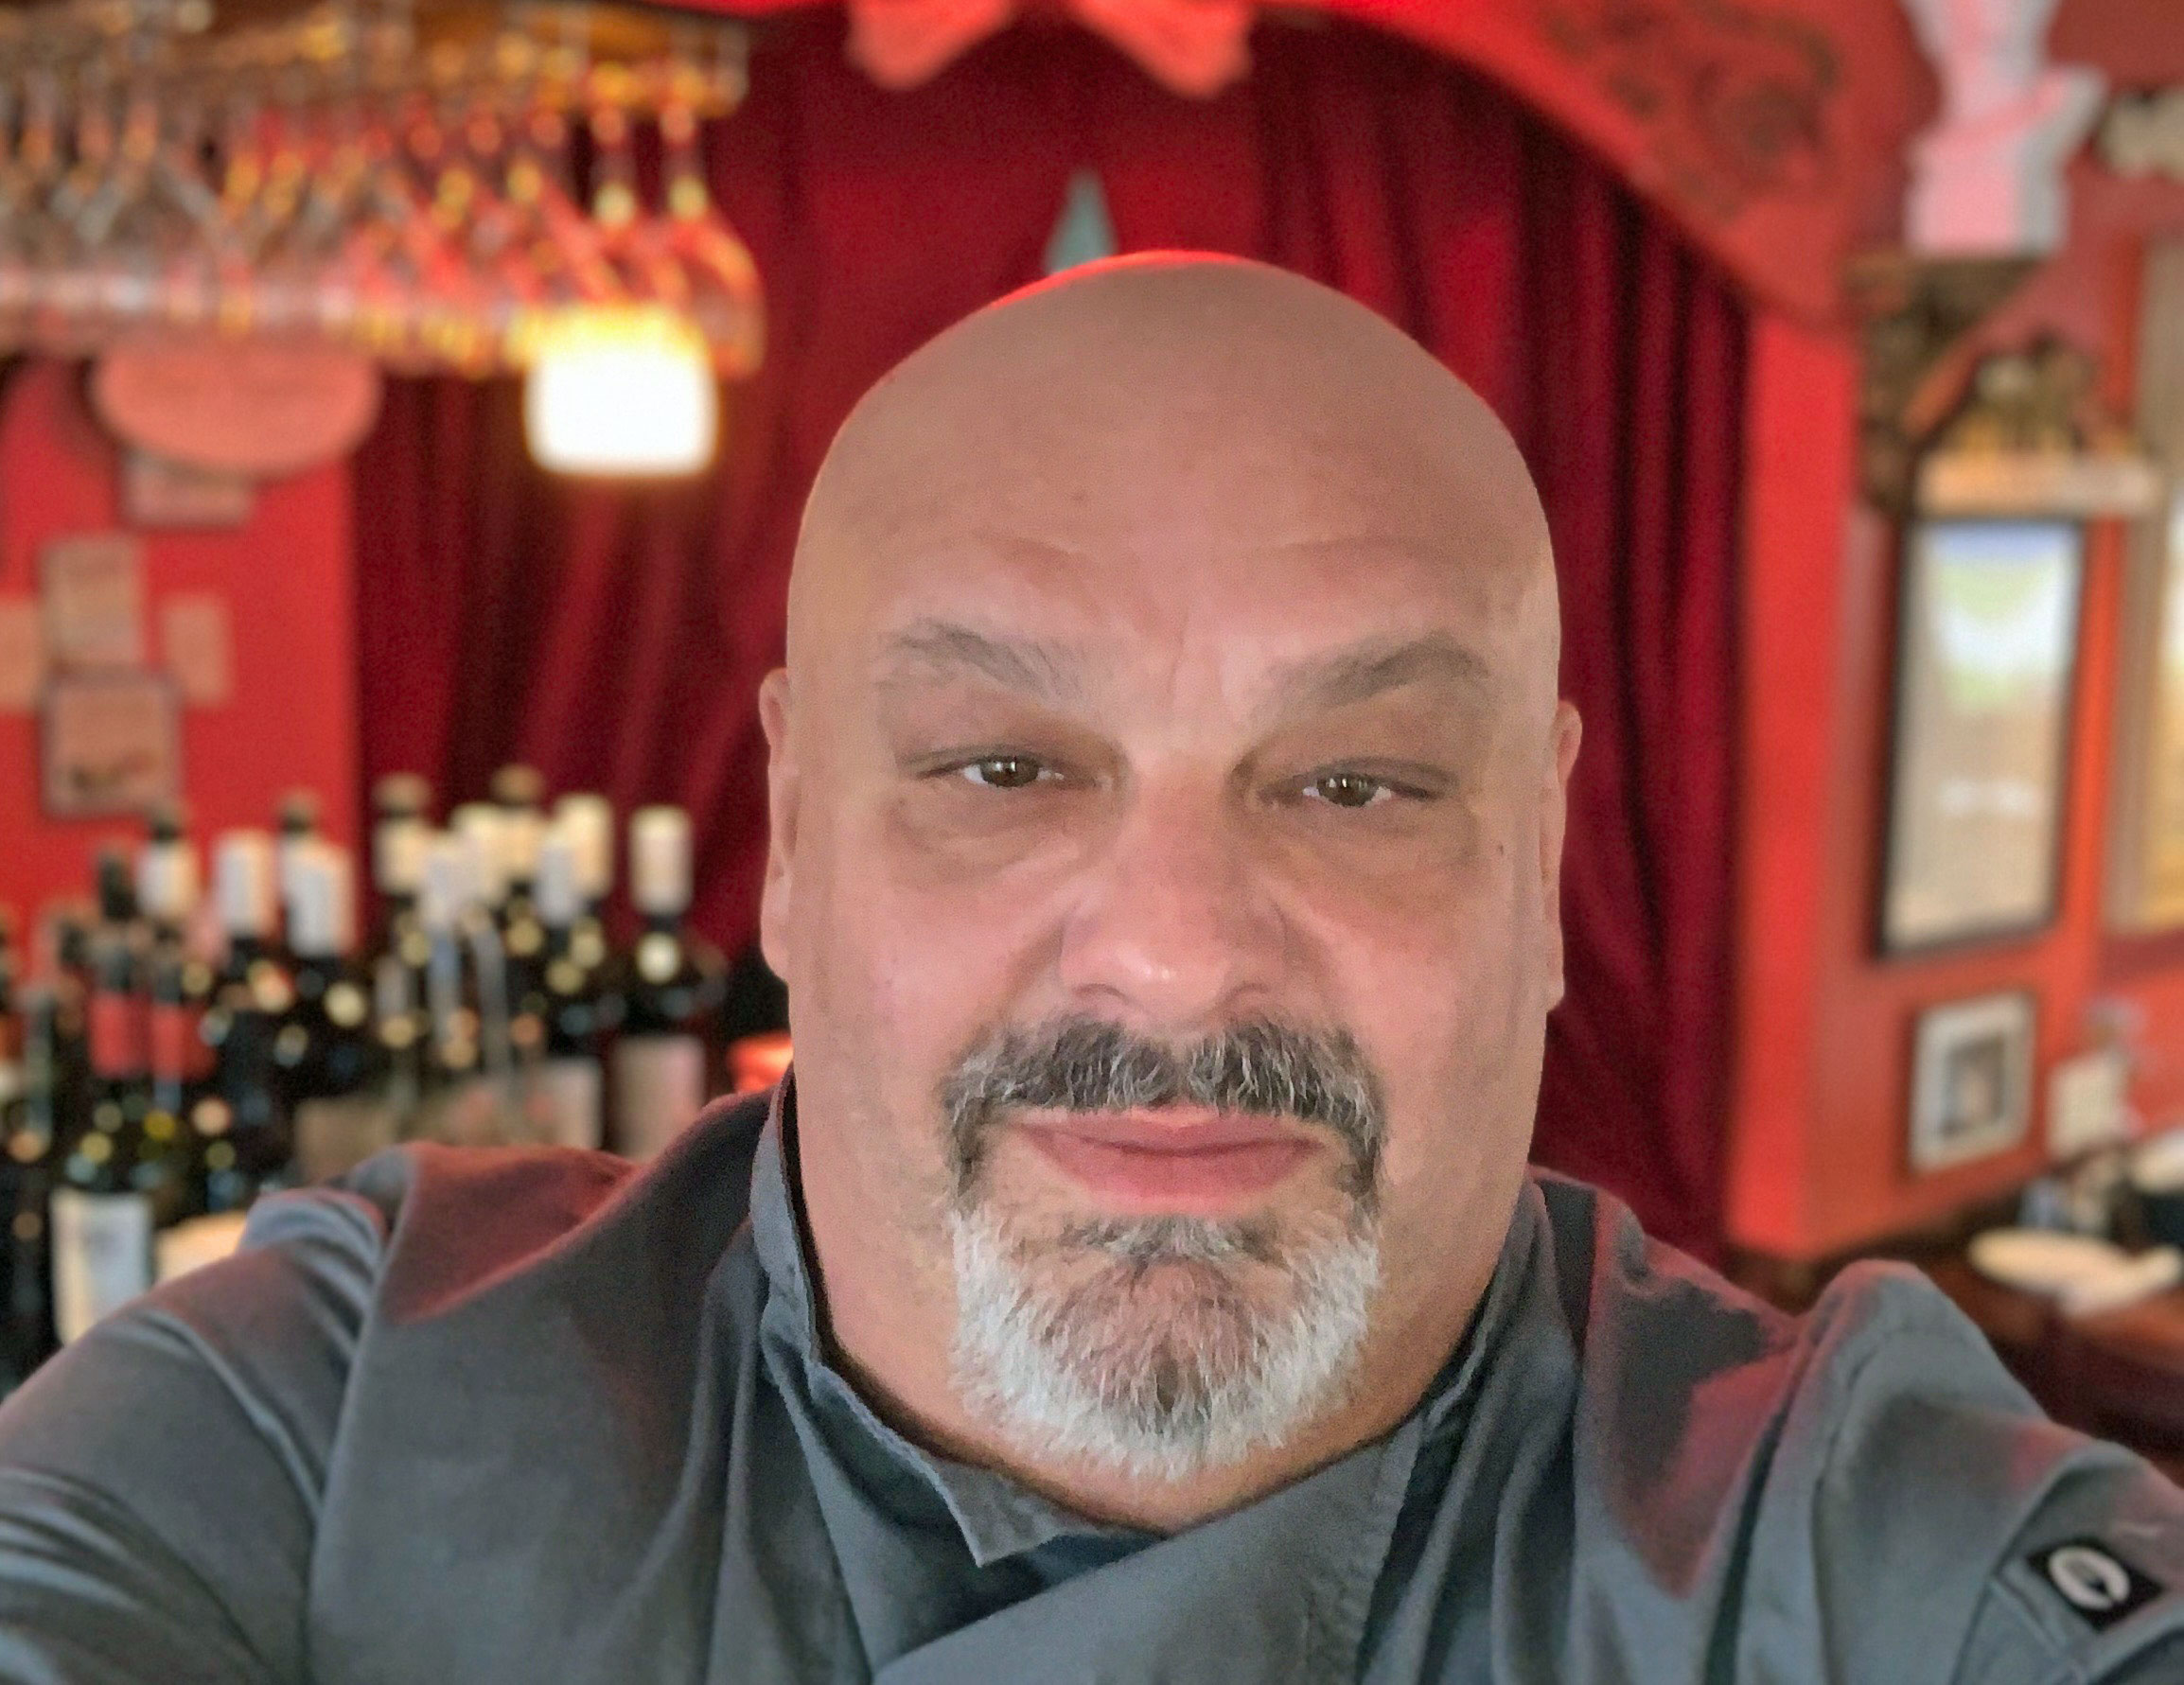 Interview with Frank Schittino from Cafe Cibo – St. Petersburg Foodies Podcast Episode 74